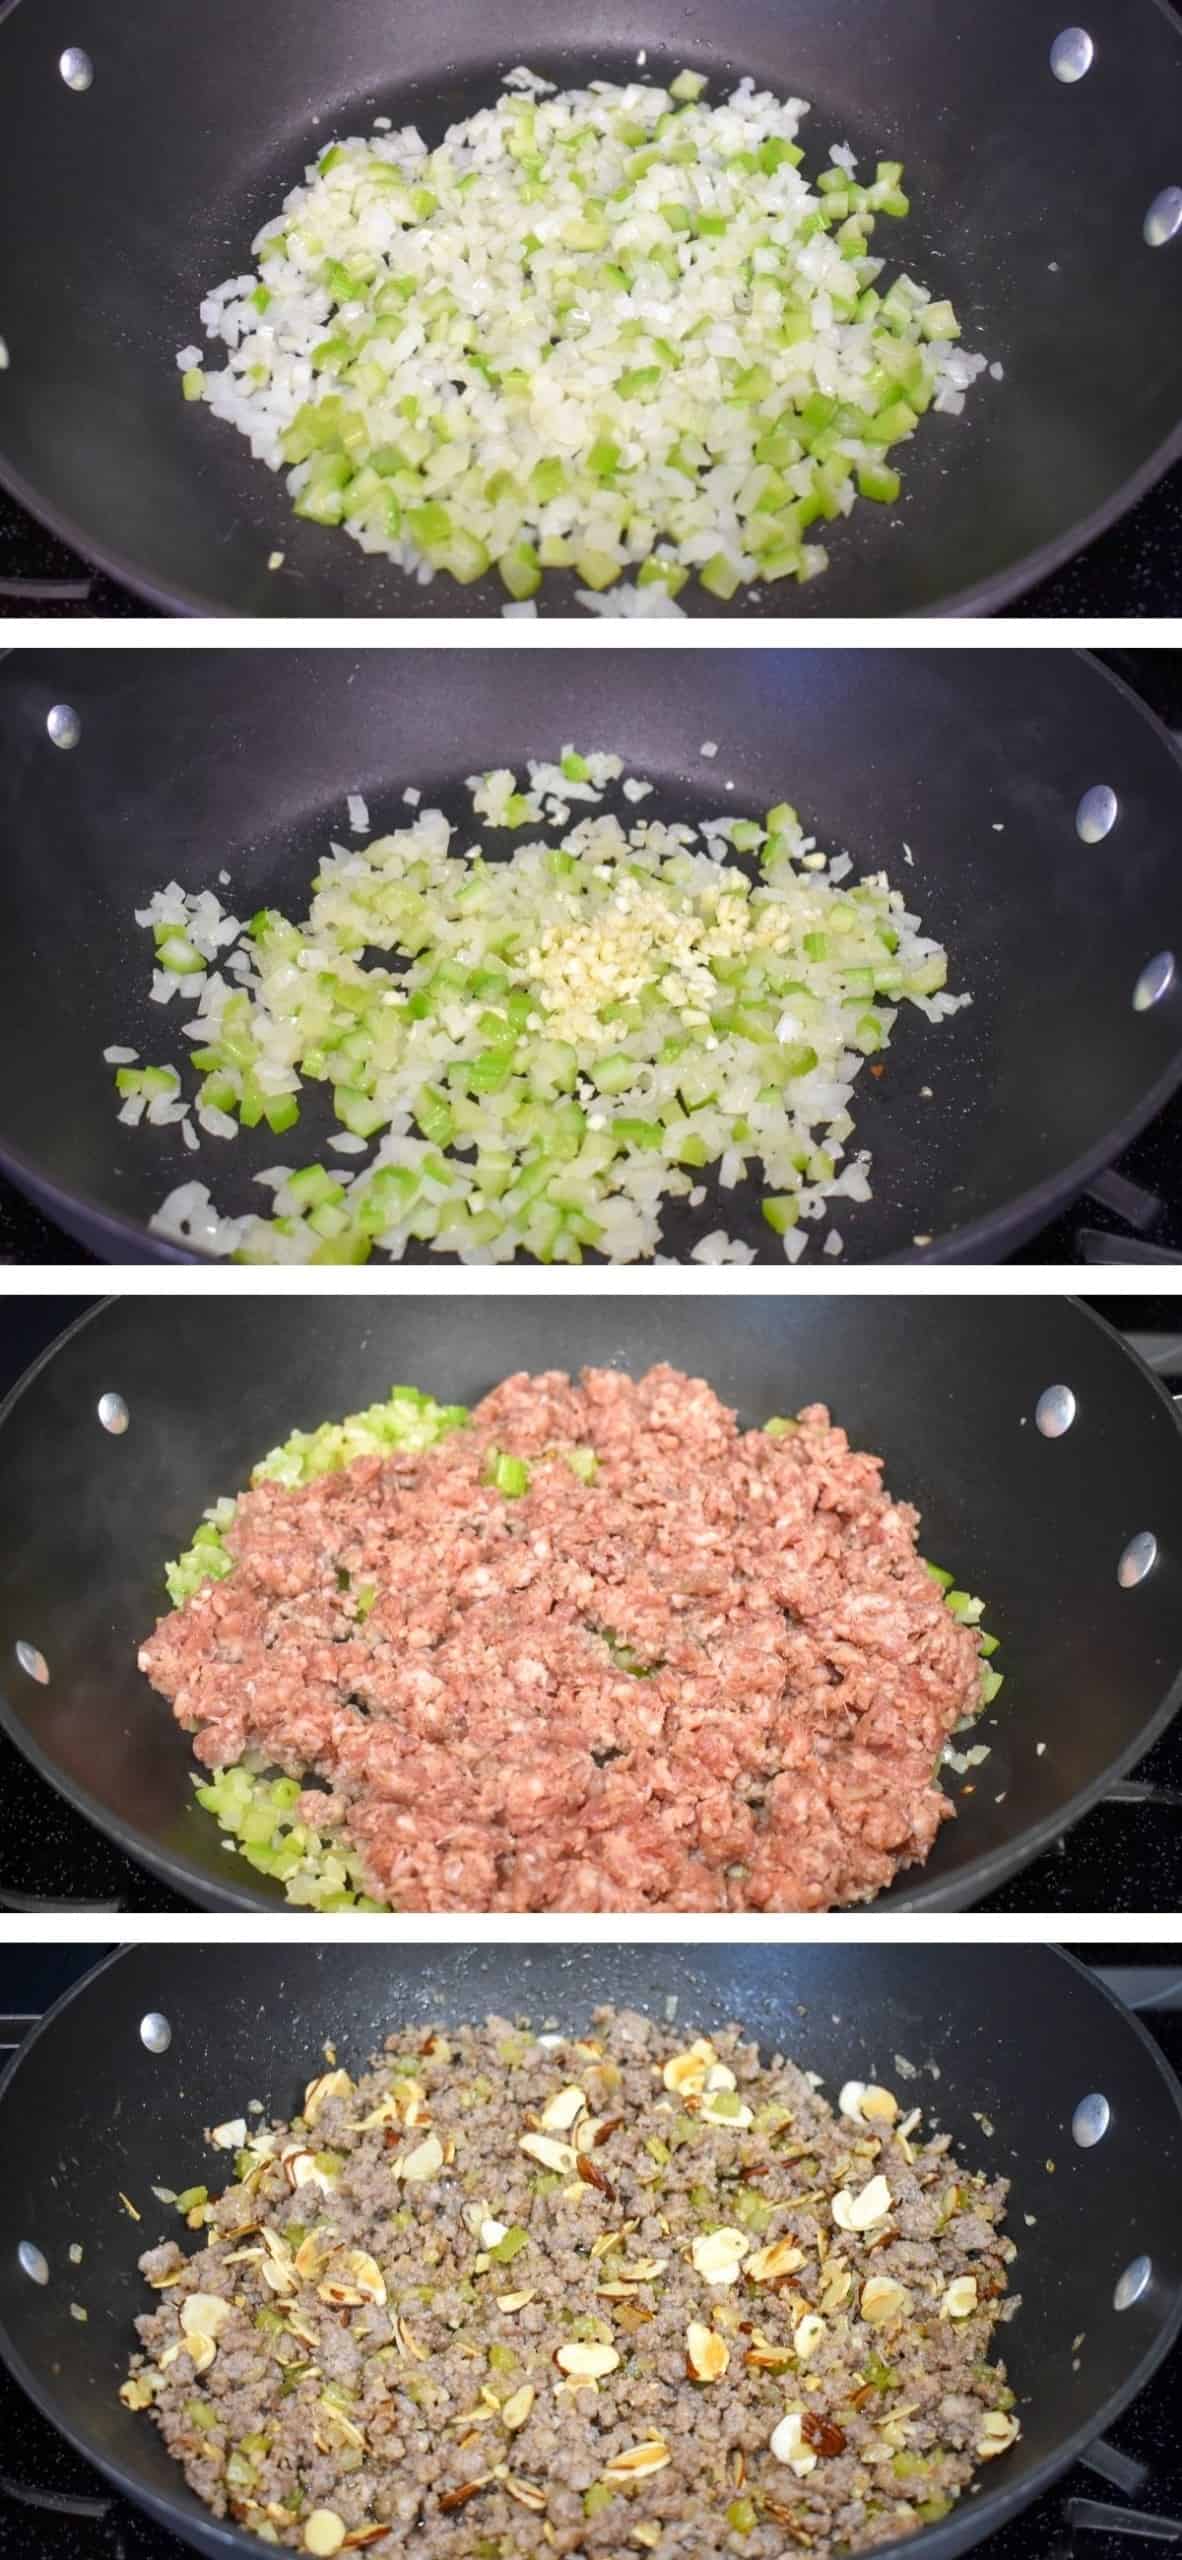 Four images showing the steps to cooking the sausage with the onions, celery, garlic and almonds at the end.